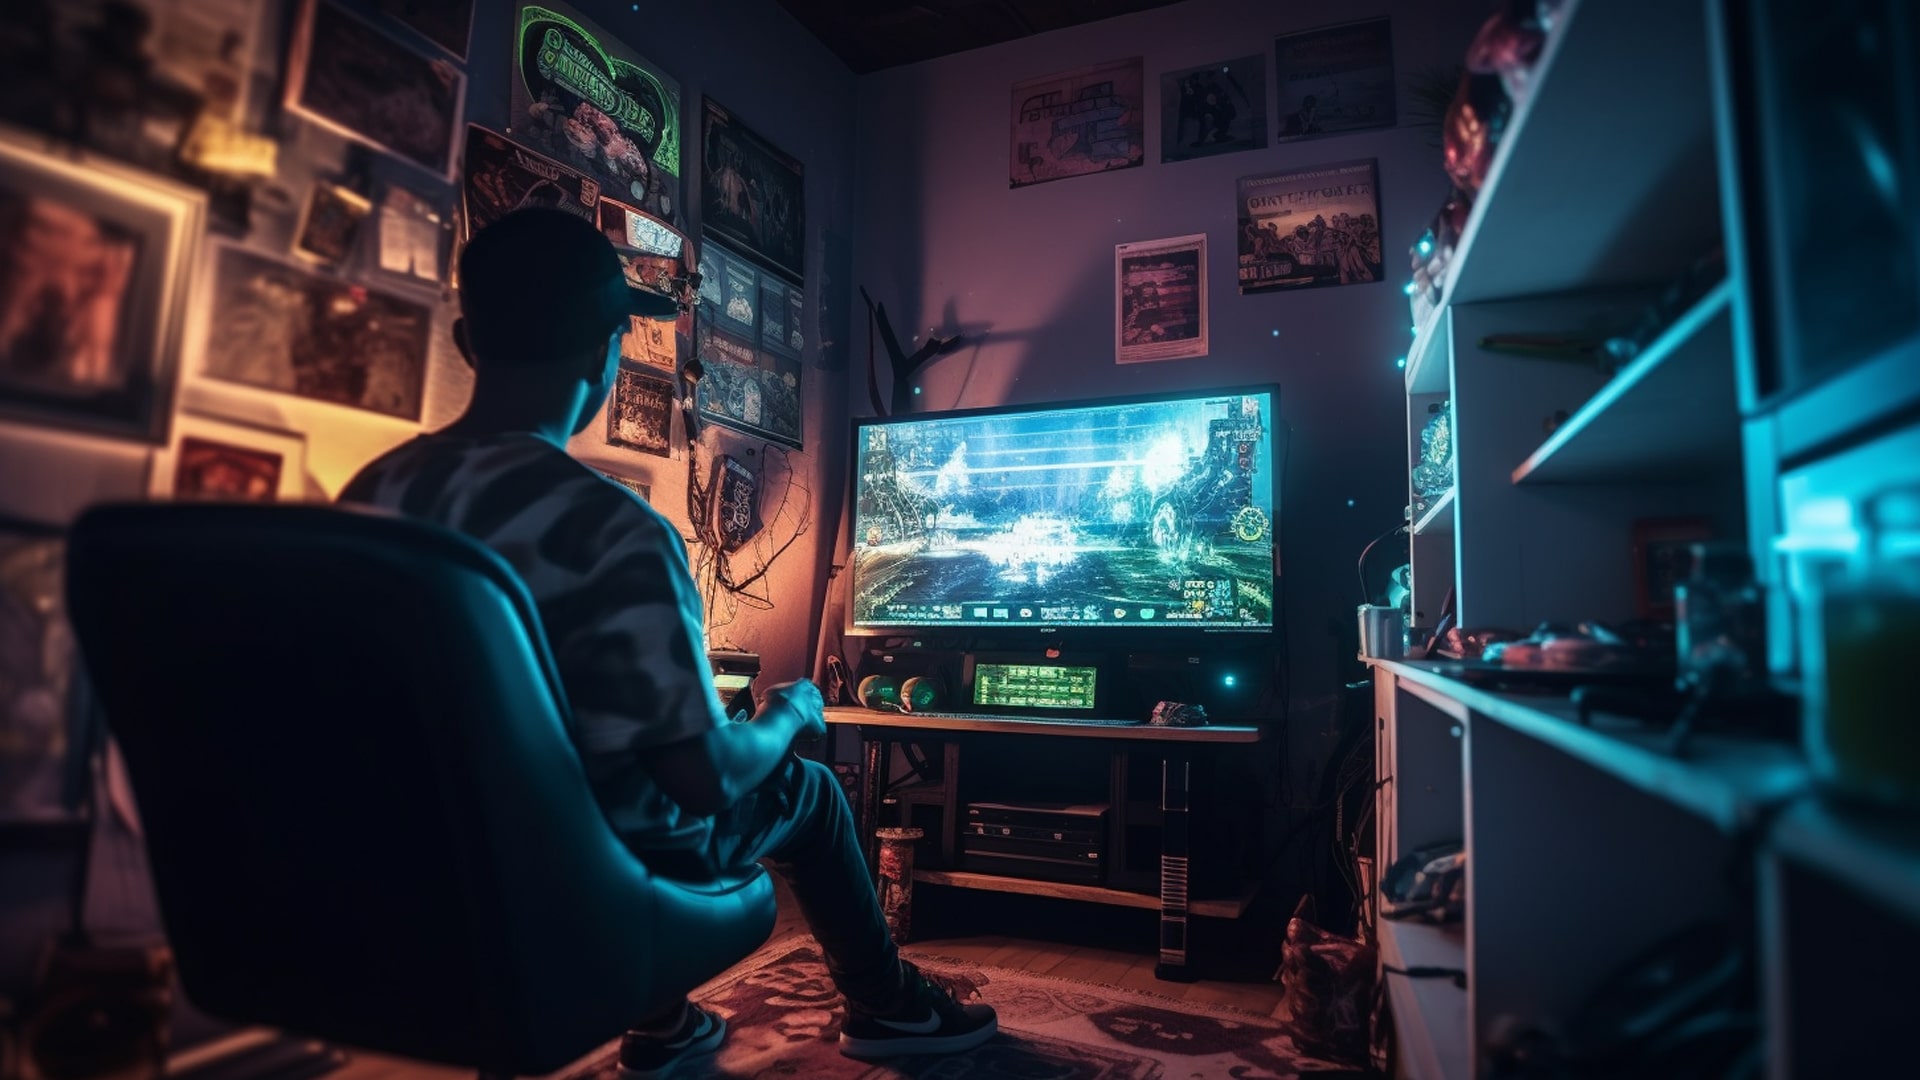 Gamer engrossed in a console game